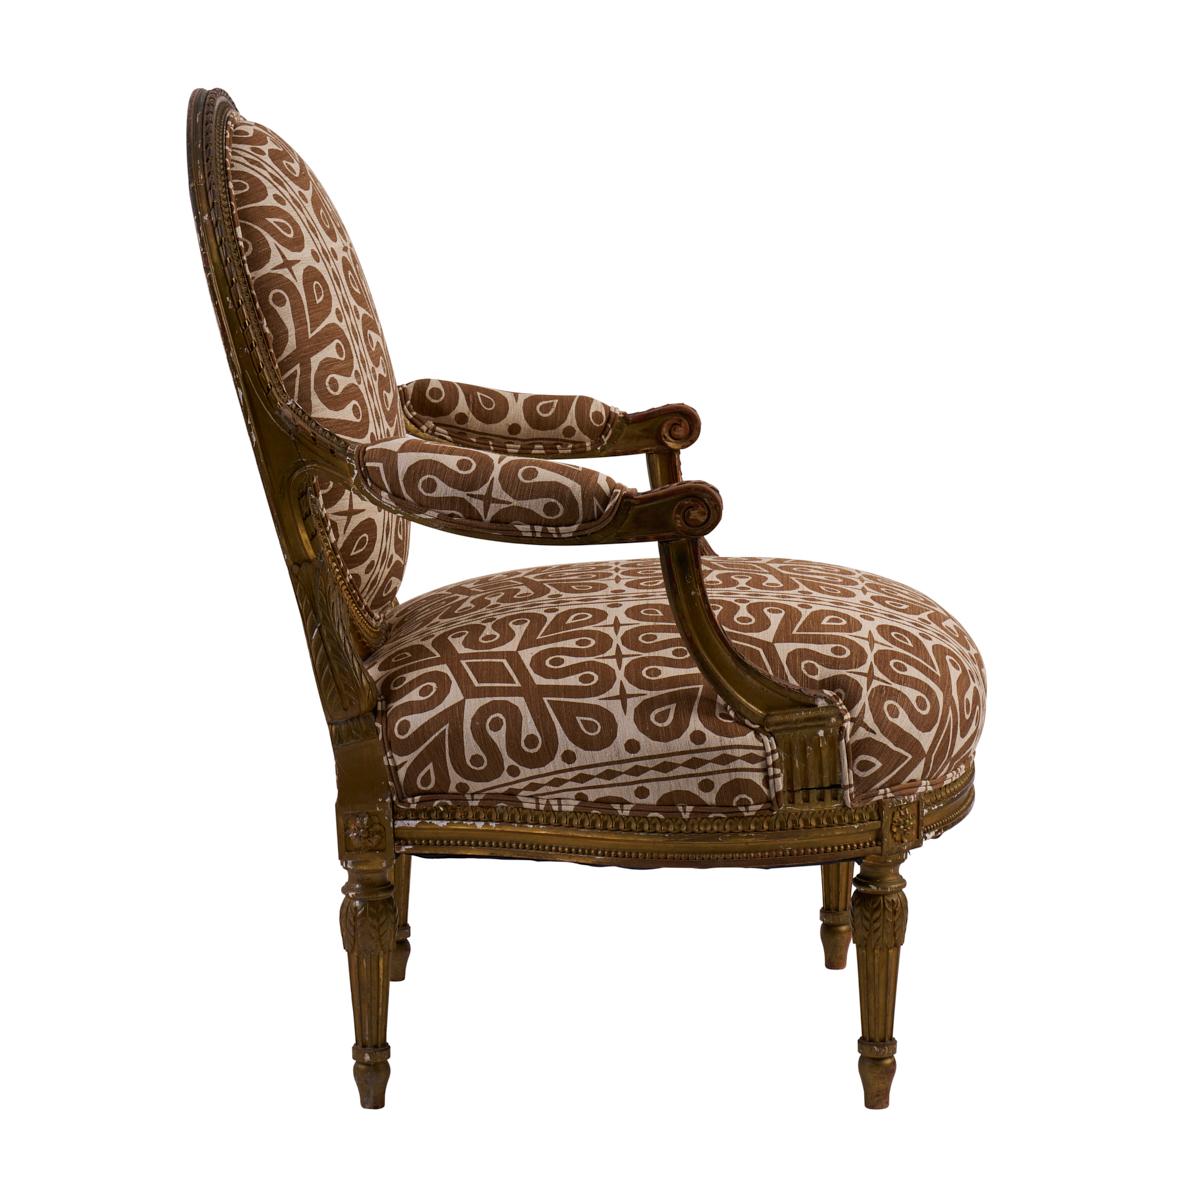 Discovered in the South of France, these dressy 19th-century fauteuils have the oval backs, scrolled handrests and straight legs associated with Louis XVI pieces. Newly upholstered in Borneo Silk fabric by Celerie Kemble, these classic chairs